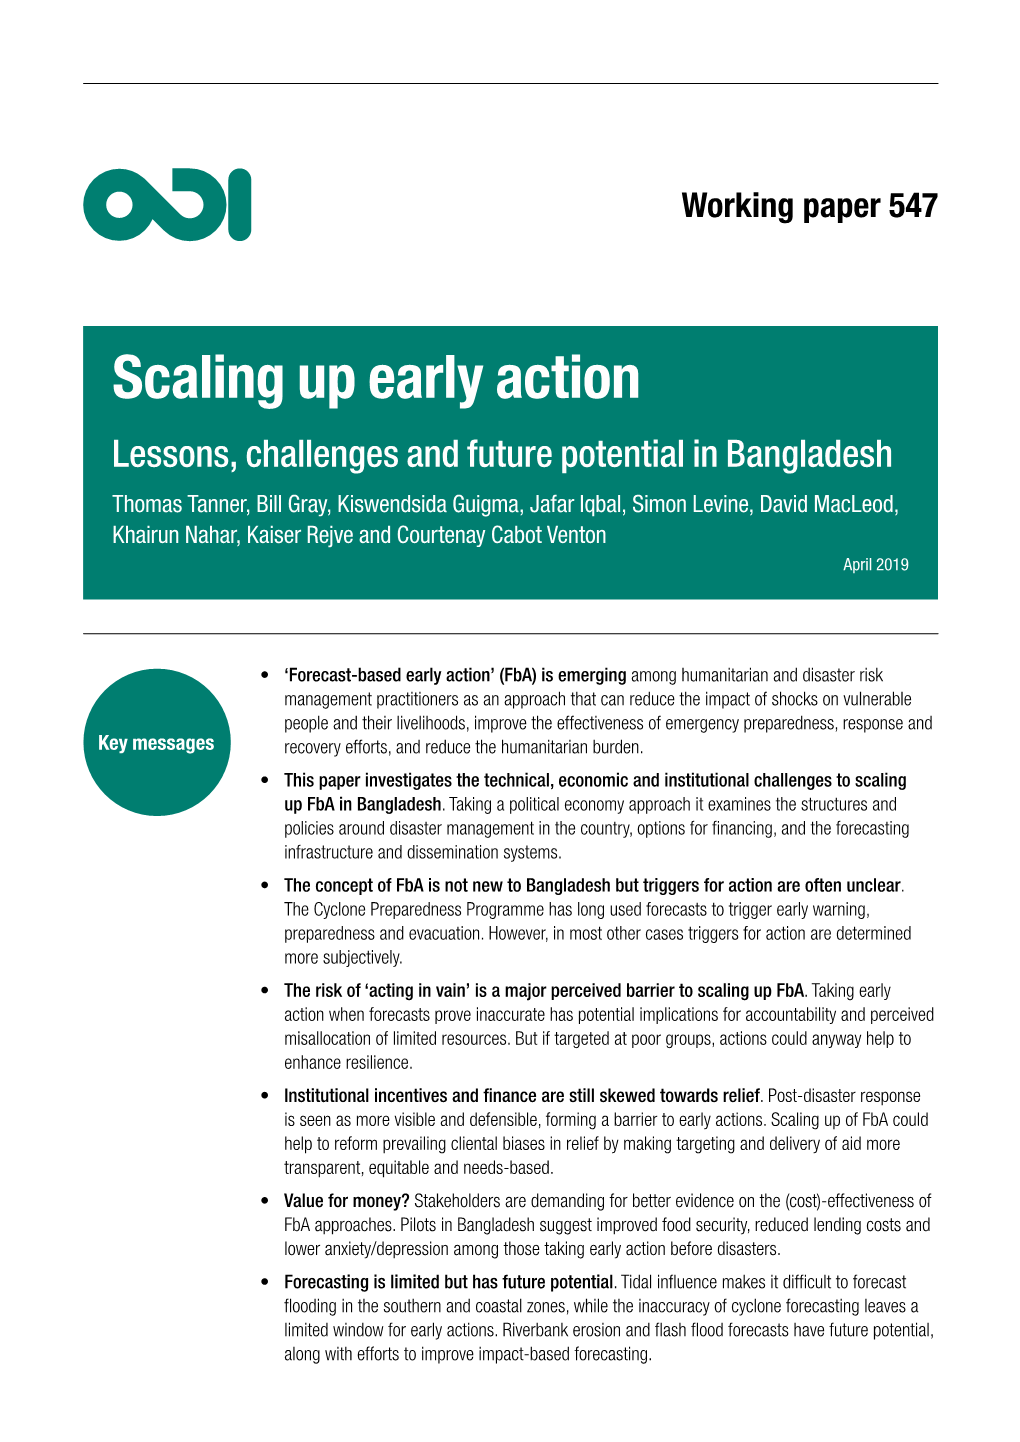 Scaling up Early Action